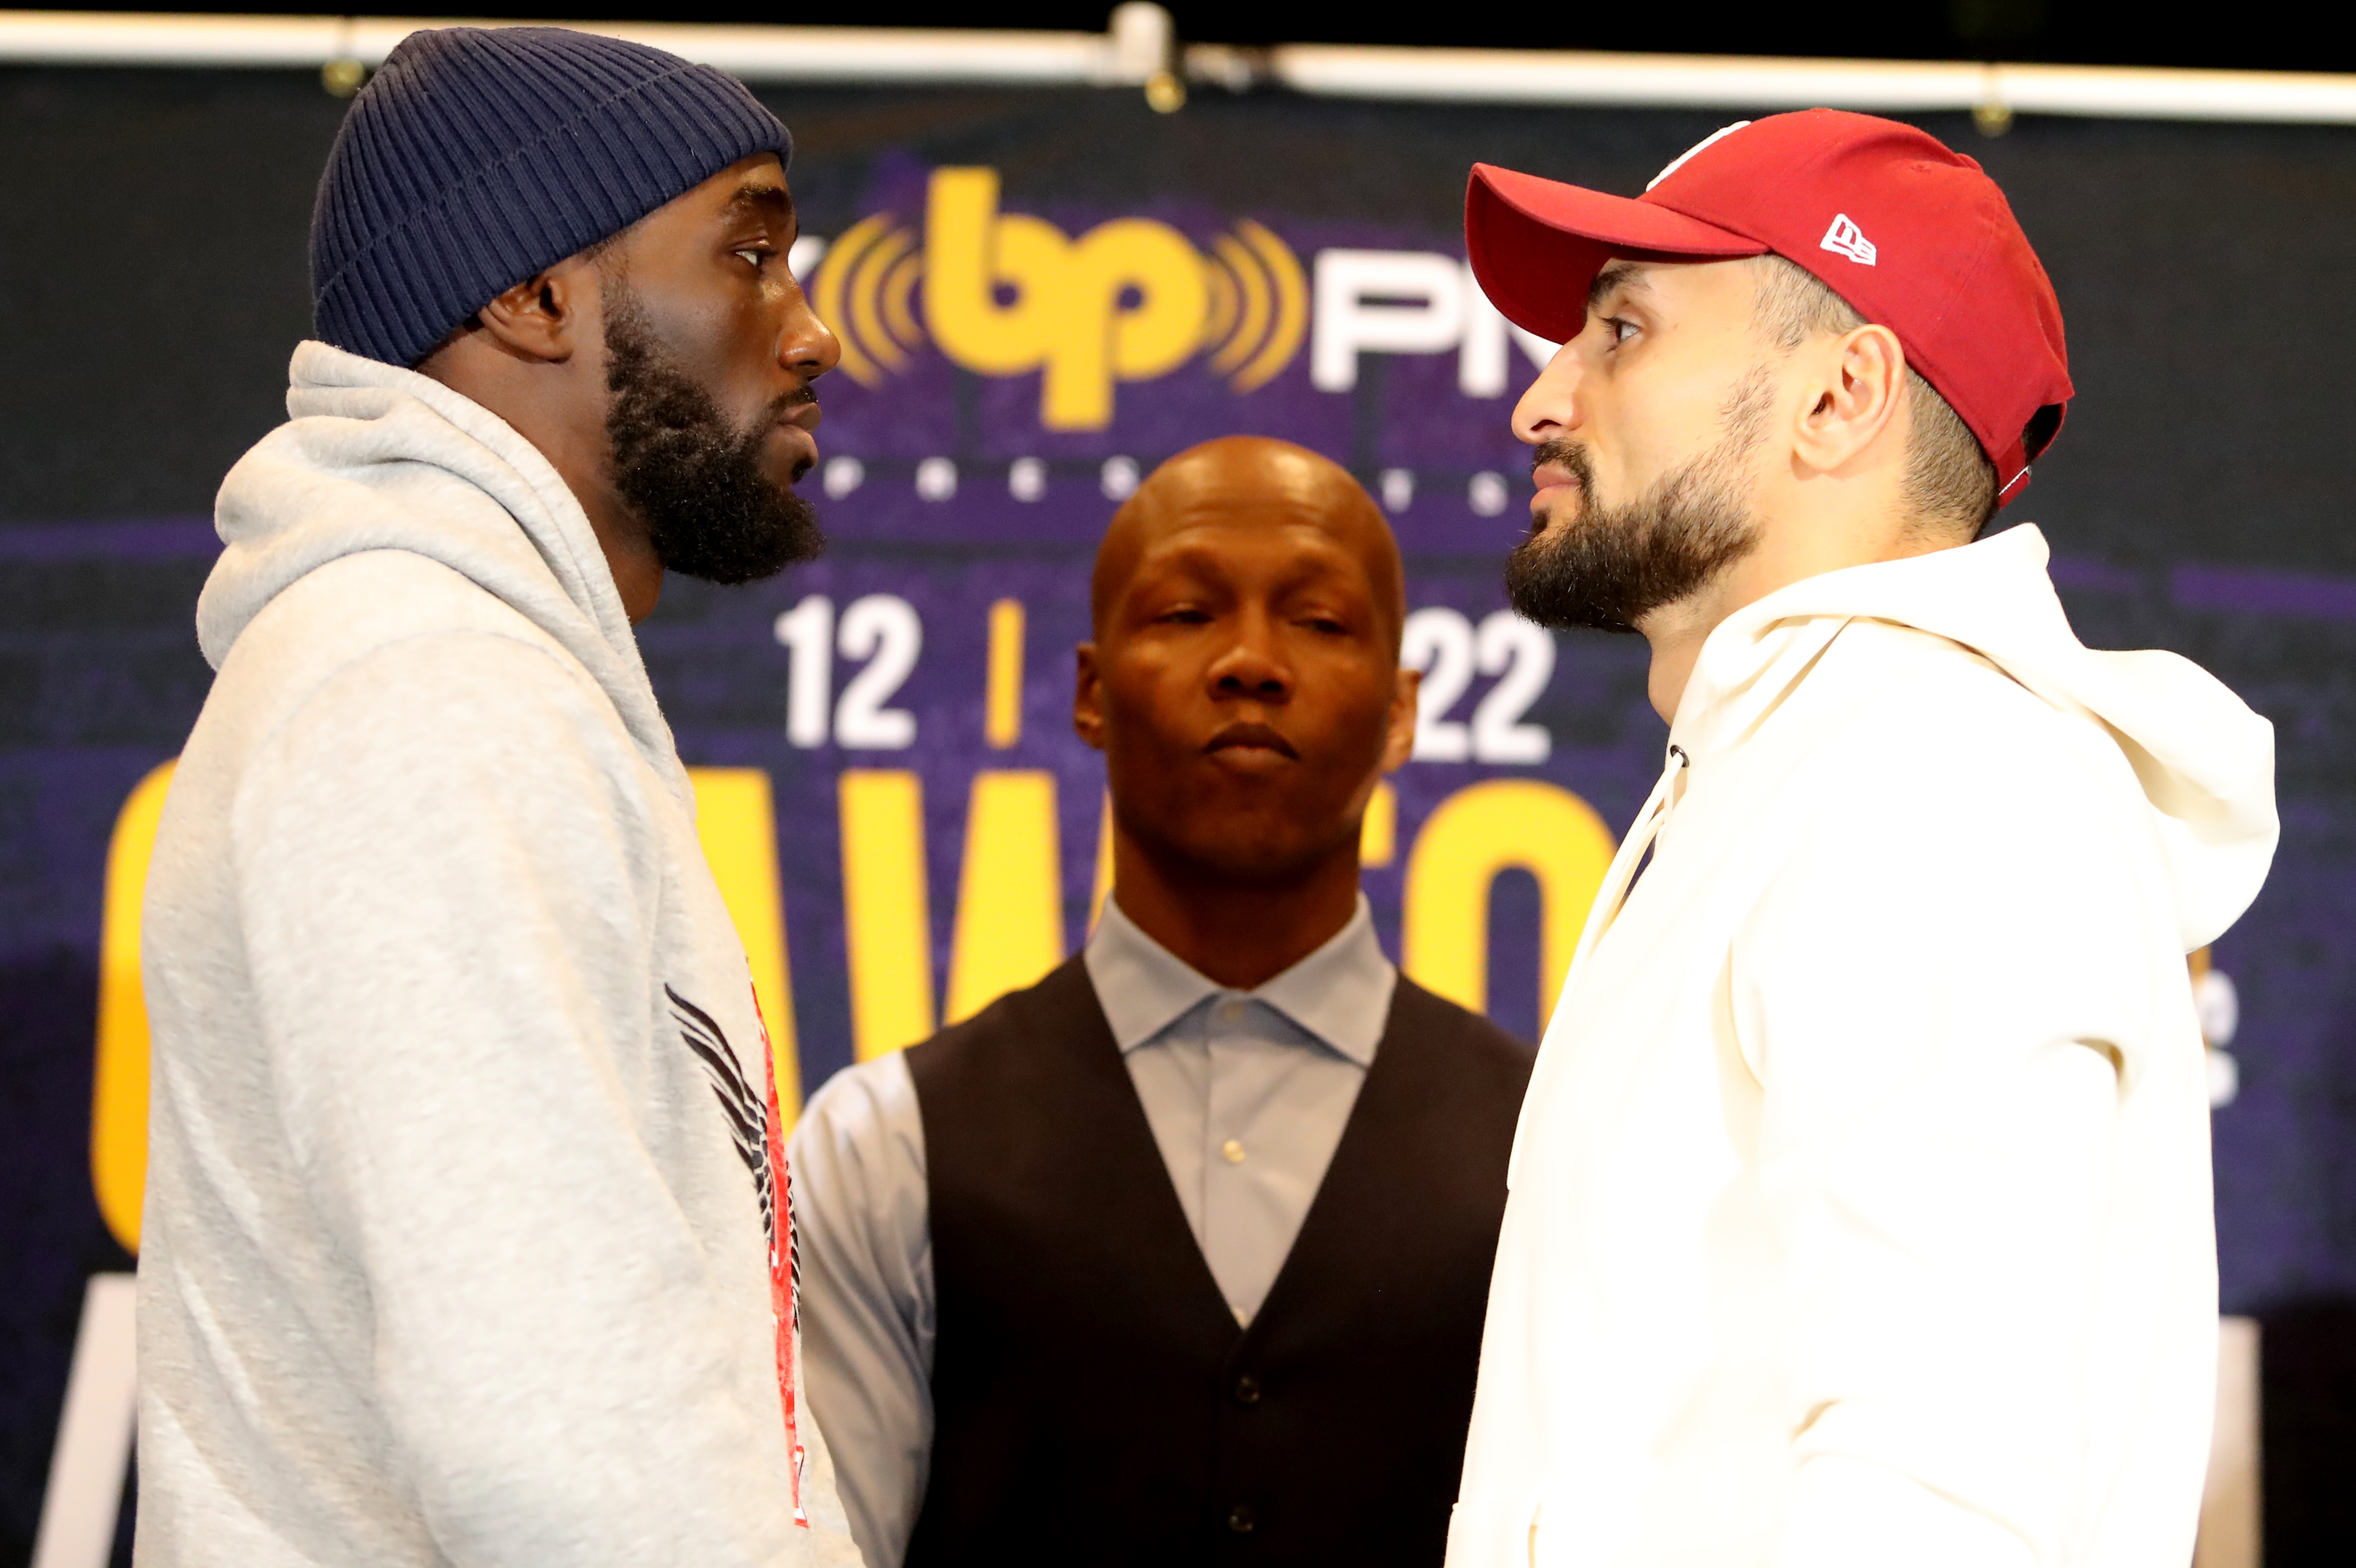 Terence Crawford faces David Avanesyan on Saturday, will we see an upset?